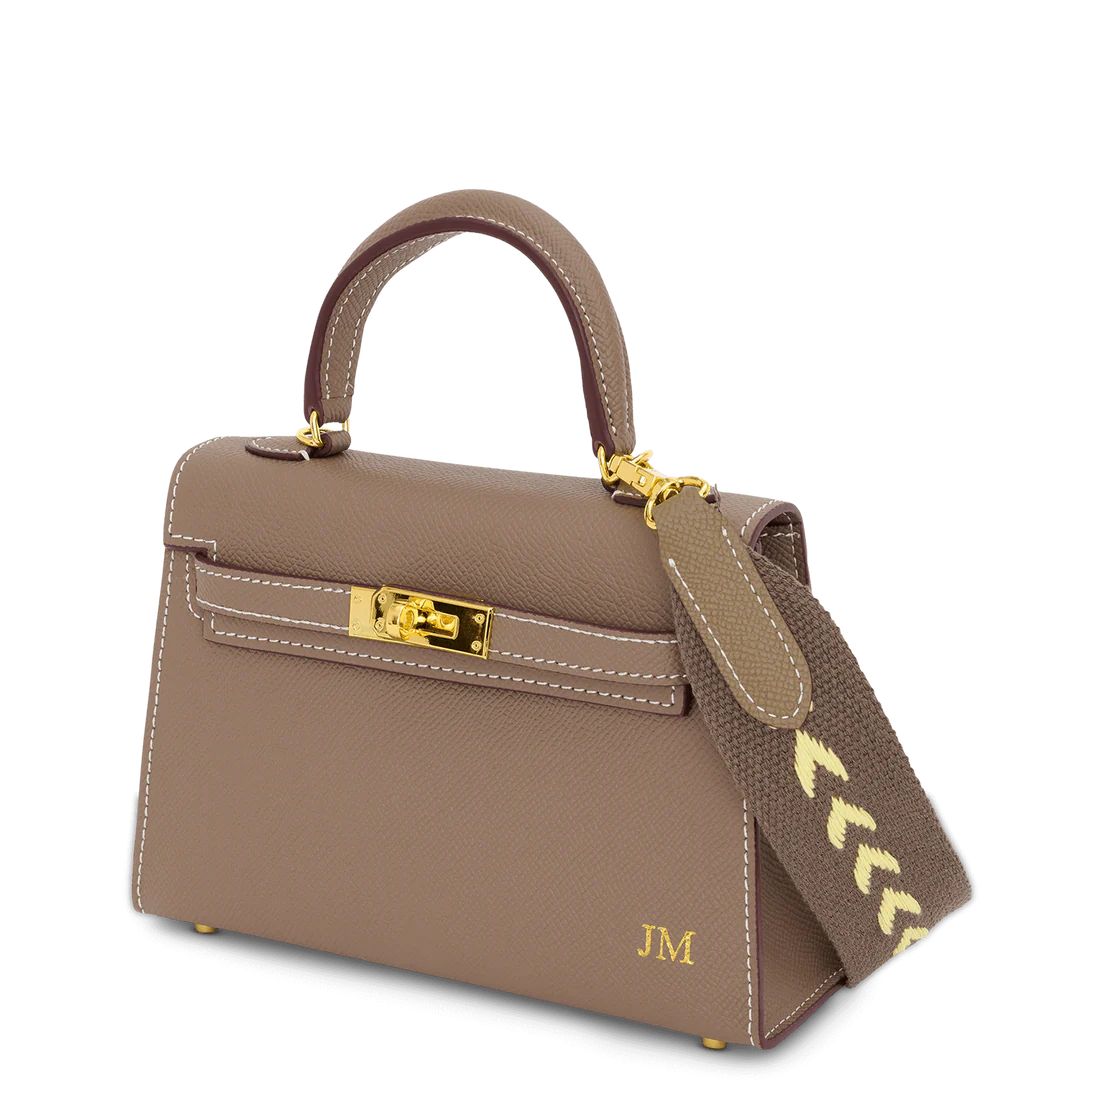 Lily & Bean Hettie Mini Bag - Mocha with Initials & Fabric Strap | Lily and Bean